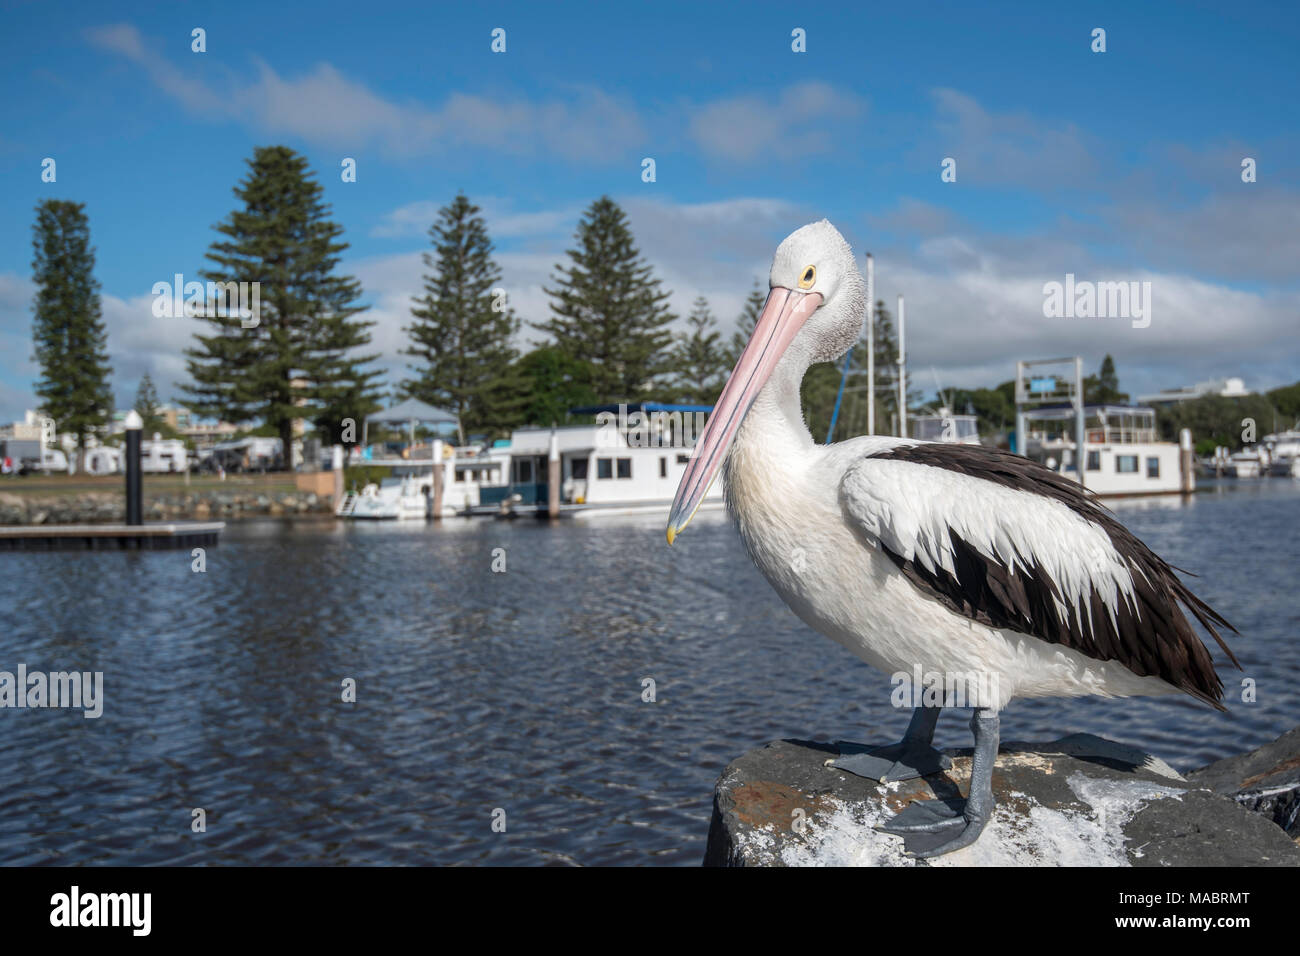 An Australian Pelican (Pelecanus conspicillatus) standing near water on a large rock. In the background are house boats and the Forster Caravan Park Stock Photo